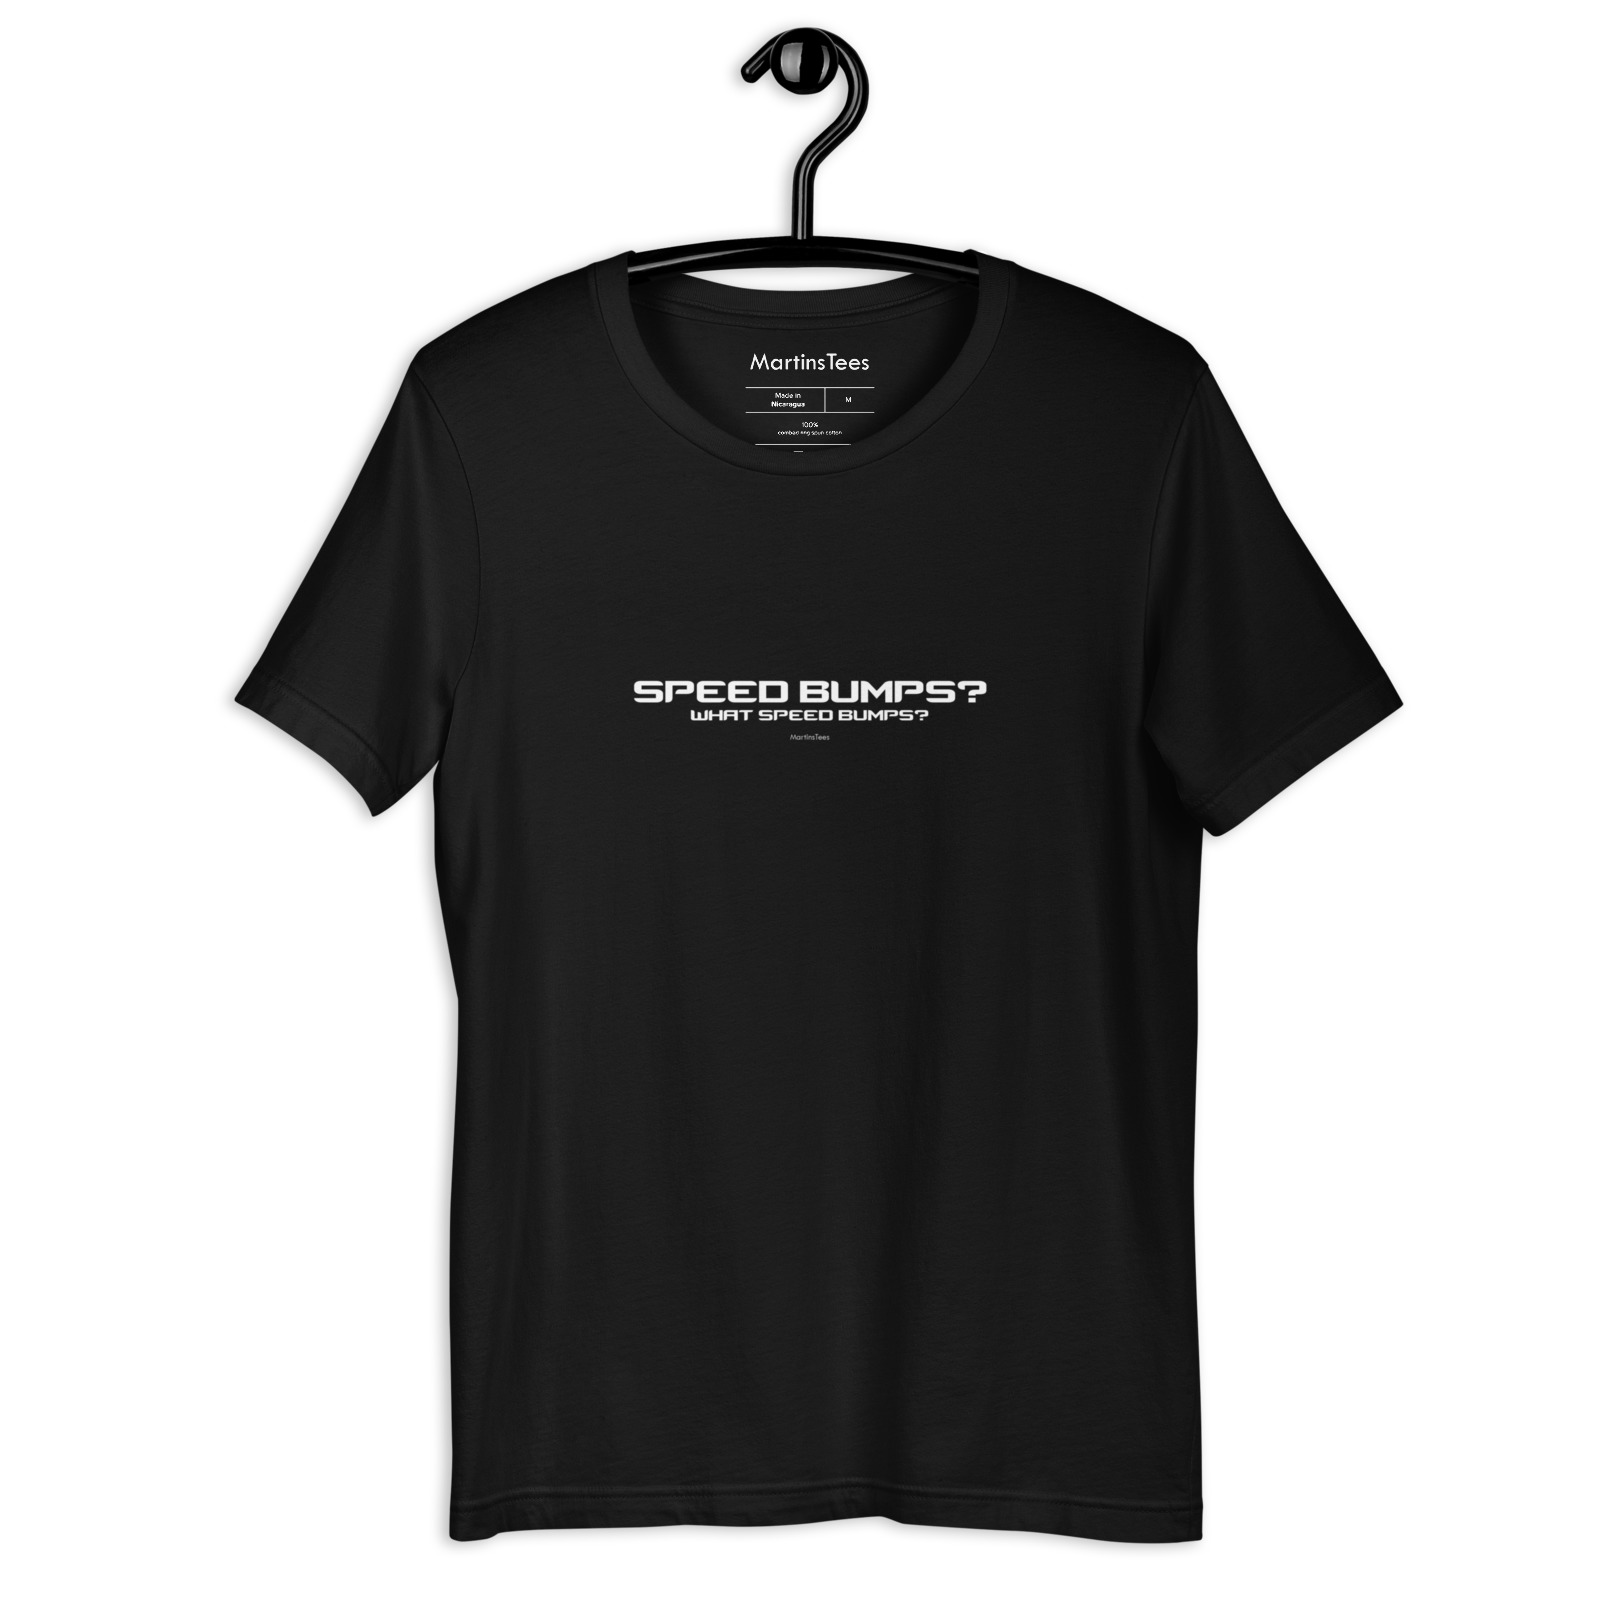 T-shirt: SPEED BUMPS? - WHAT SPEED BUMPS?